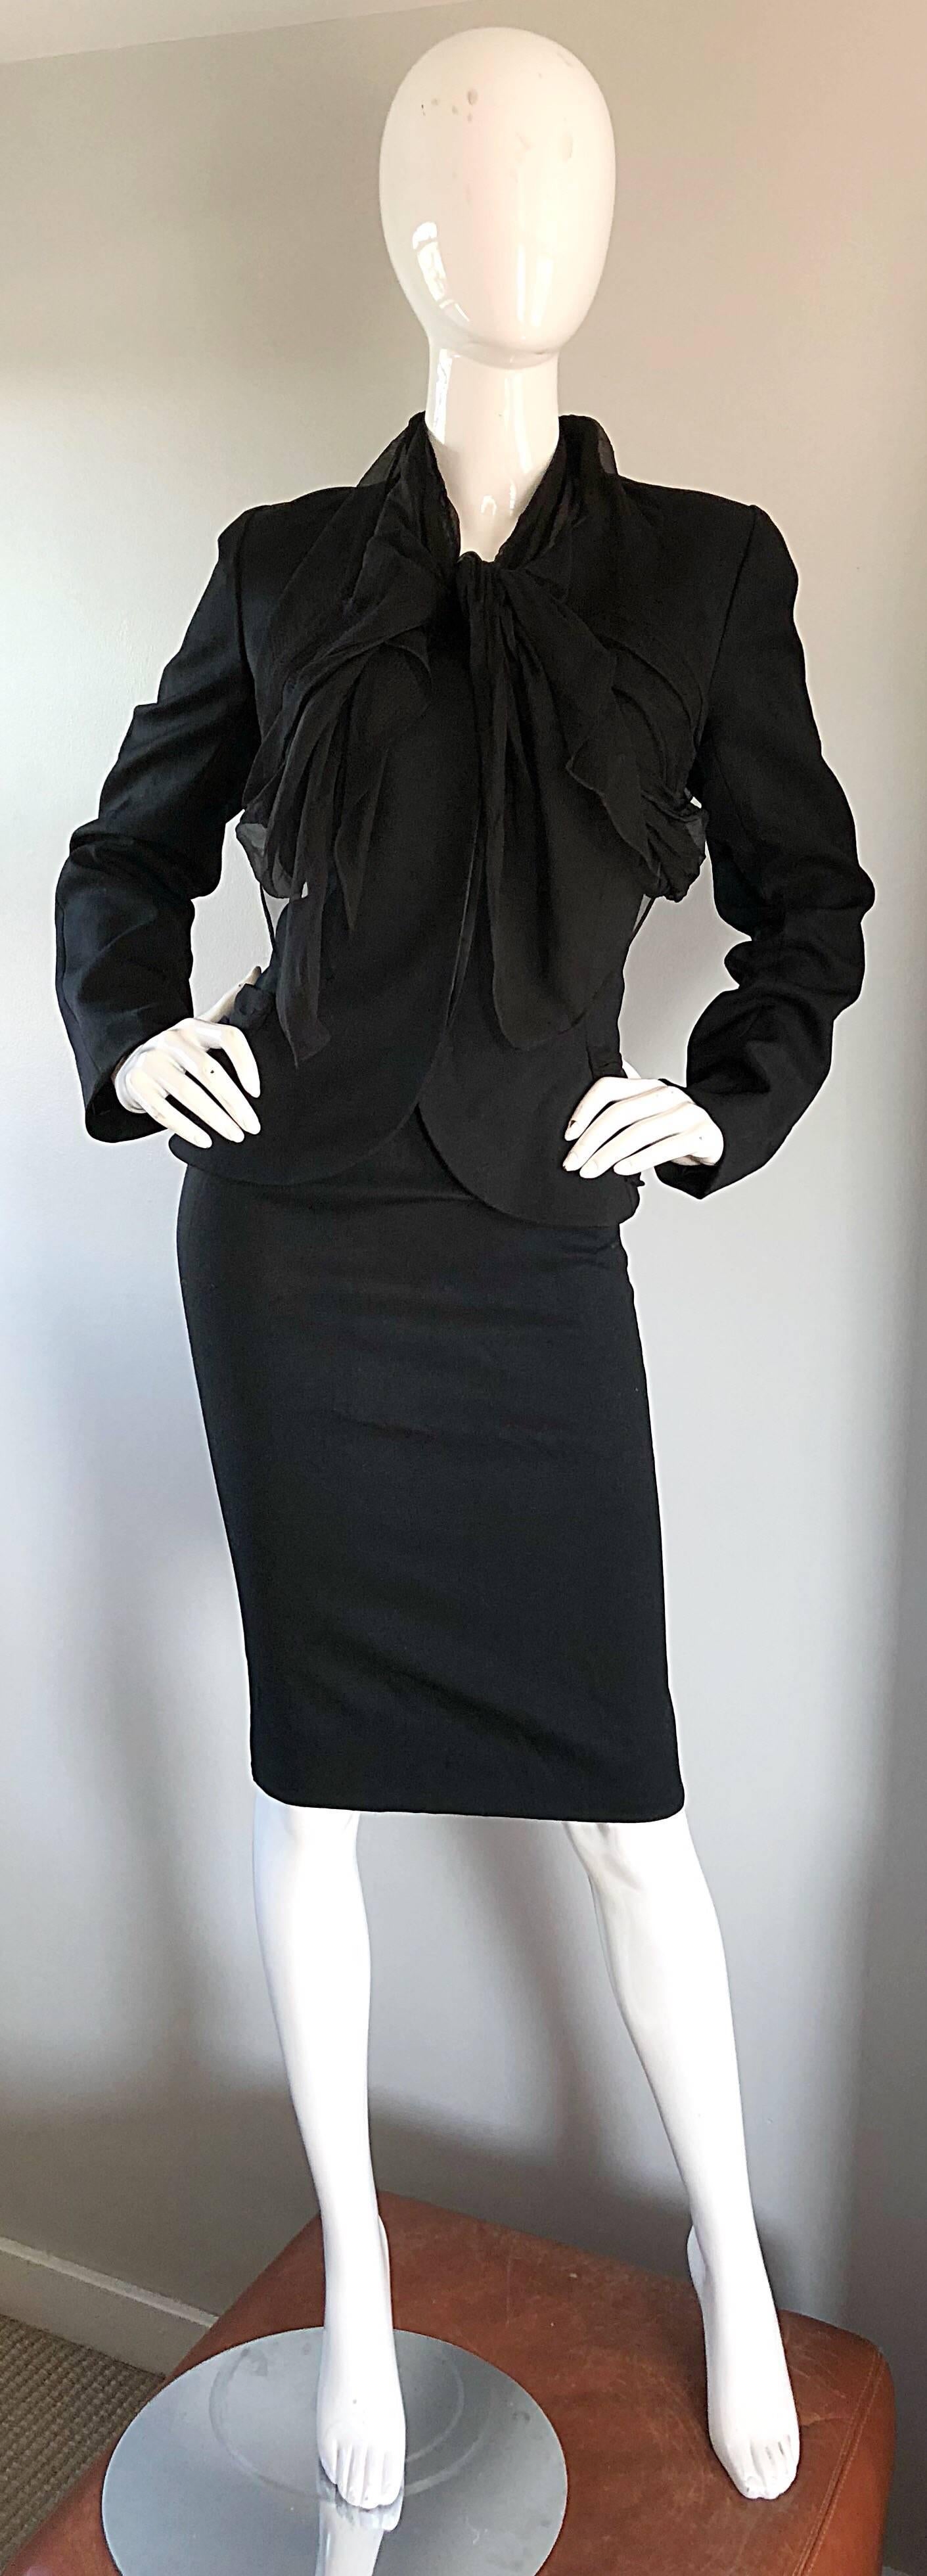 Chic early 2000s Does 40s black JOHN GALLIANO virgin wool and silk chiffon skirt suit! Features a soft black virgin wool, with Avant Garde black silk chiffon Bonnie and Clyde detail at neck and waist. Hidden buttons up the front blazer bodice. High